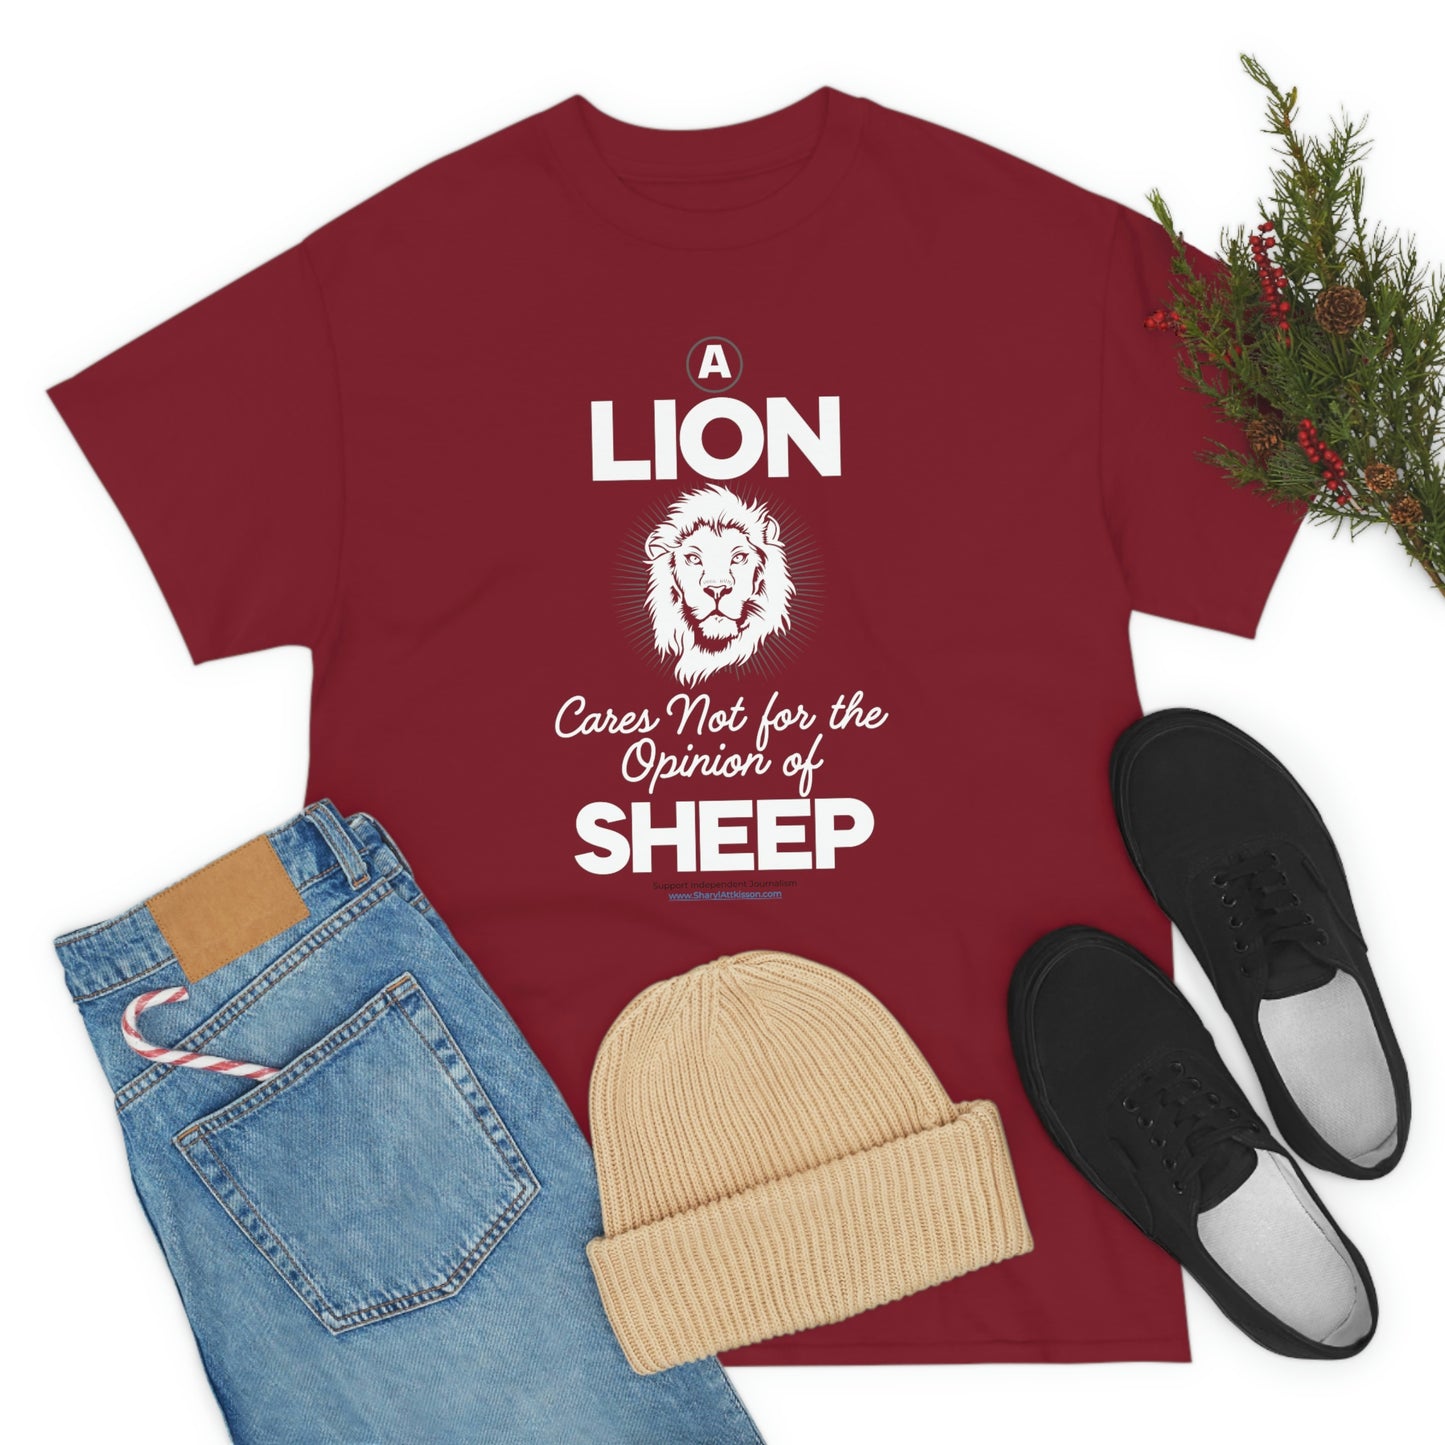 'A Lion Cares Not for...Sheep' T-Shirt (8 colors)